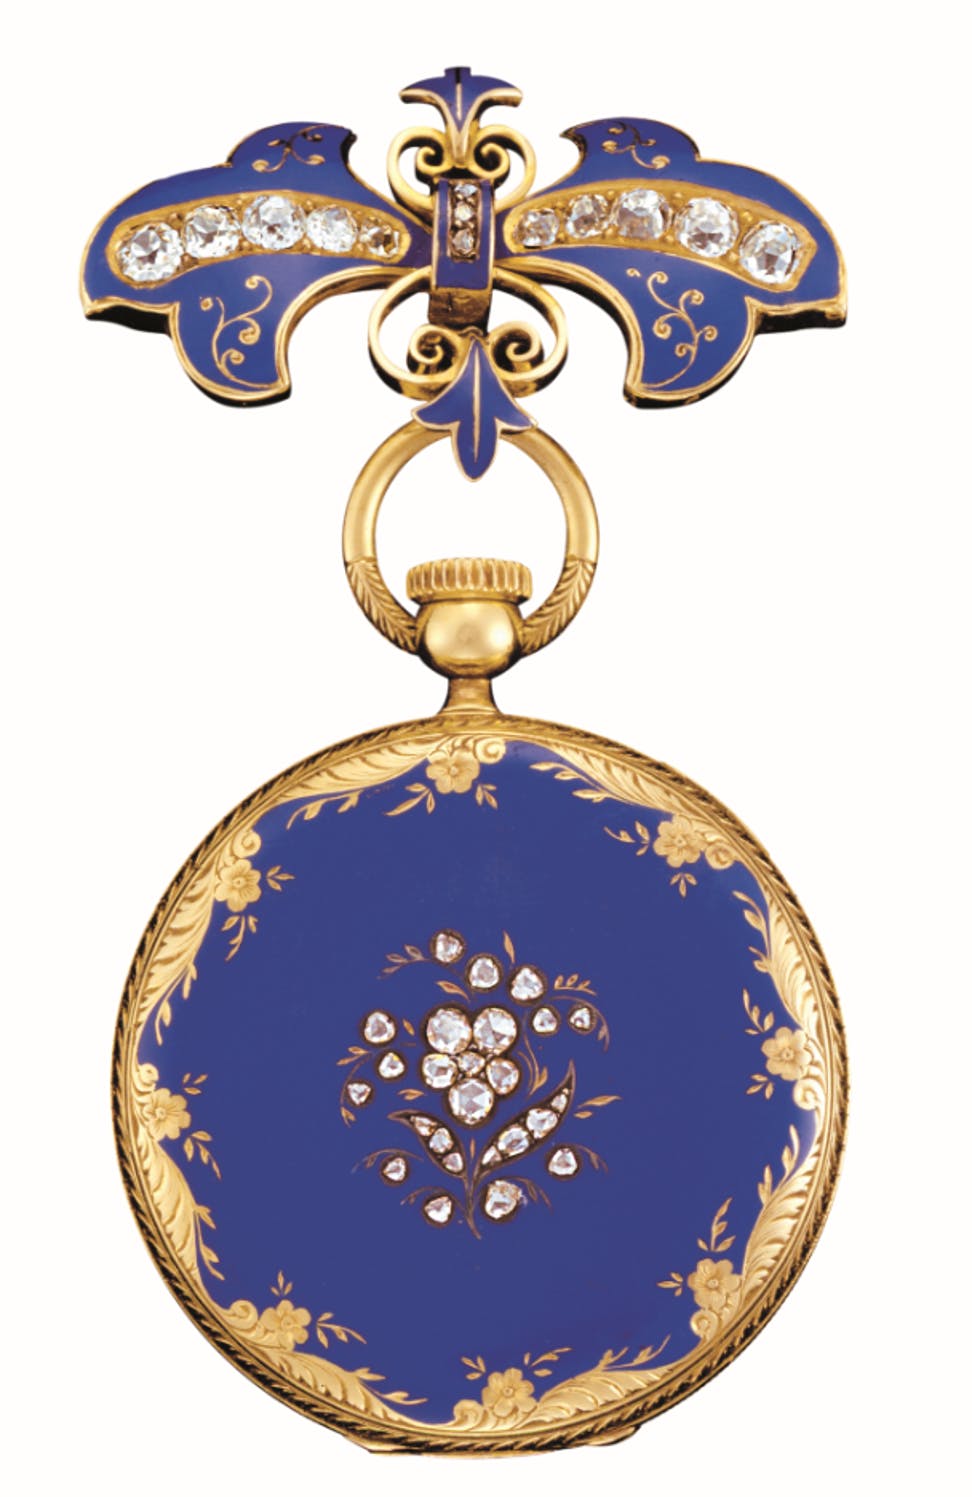 The outside of Queen Victoria's Pocket watch, with Brooch clasp, in Gold, Blue Enamel, and Diamonds.